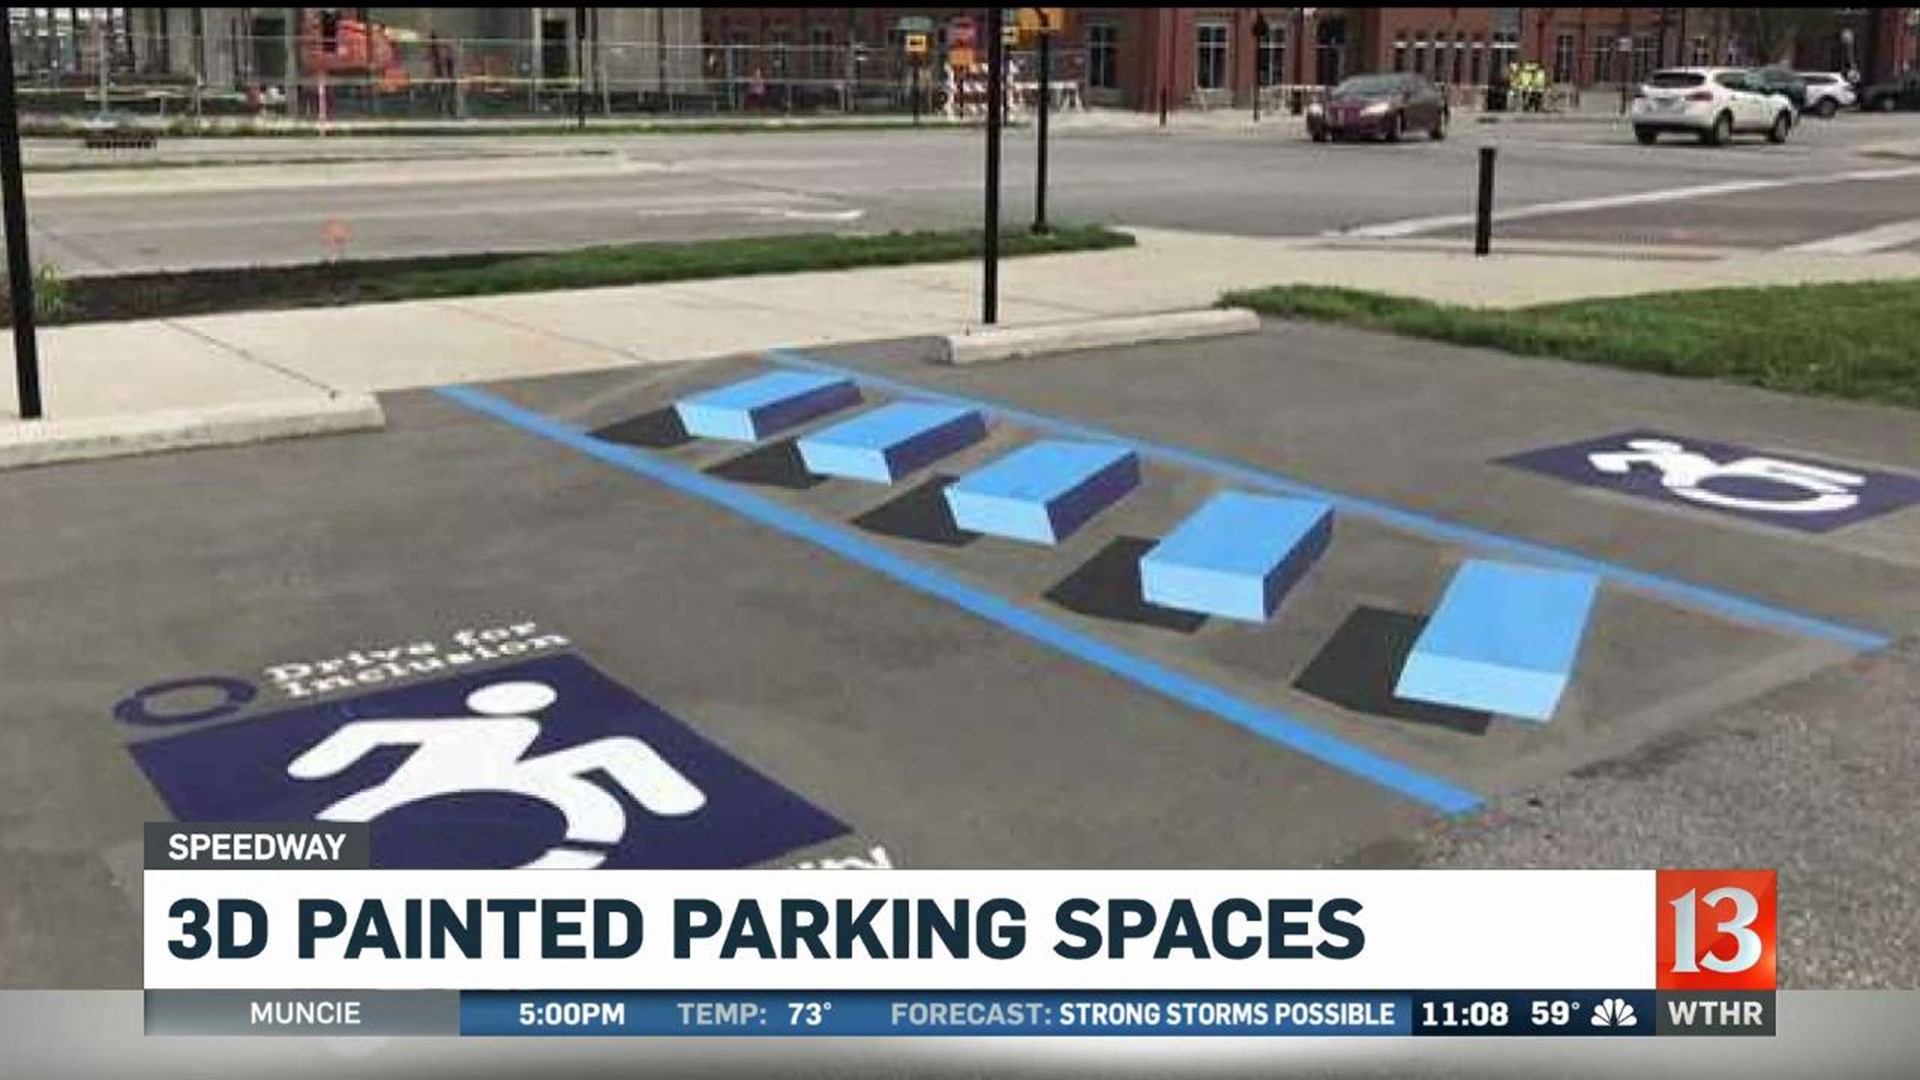 3D Painted Parking Spaces in Speedway